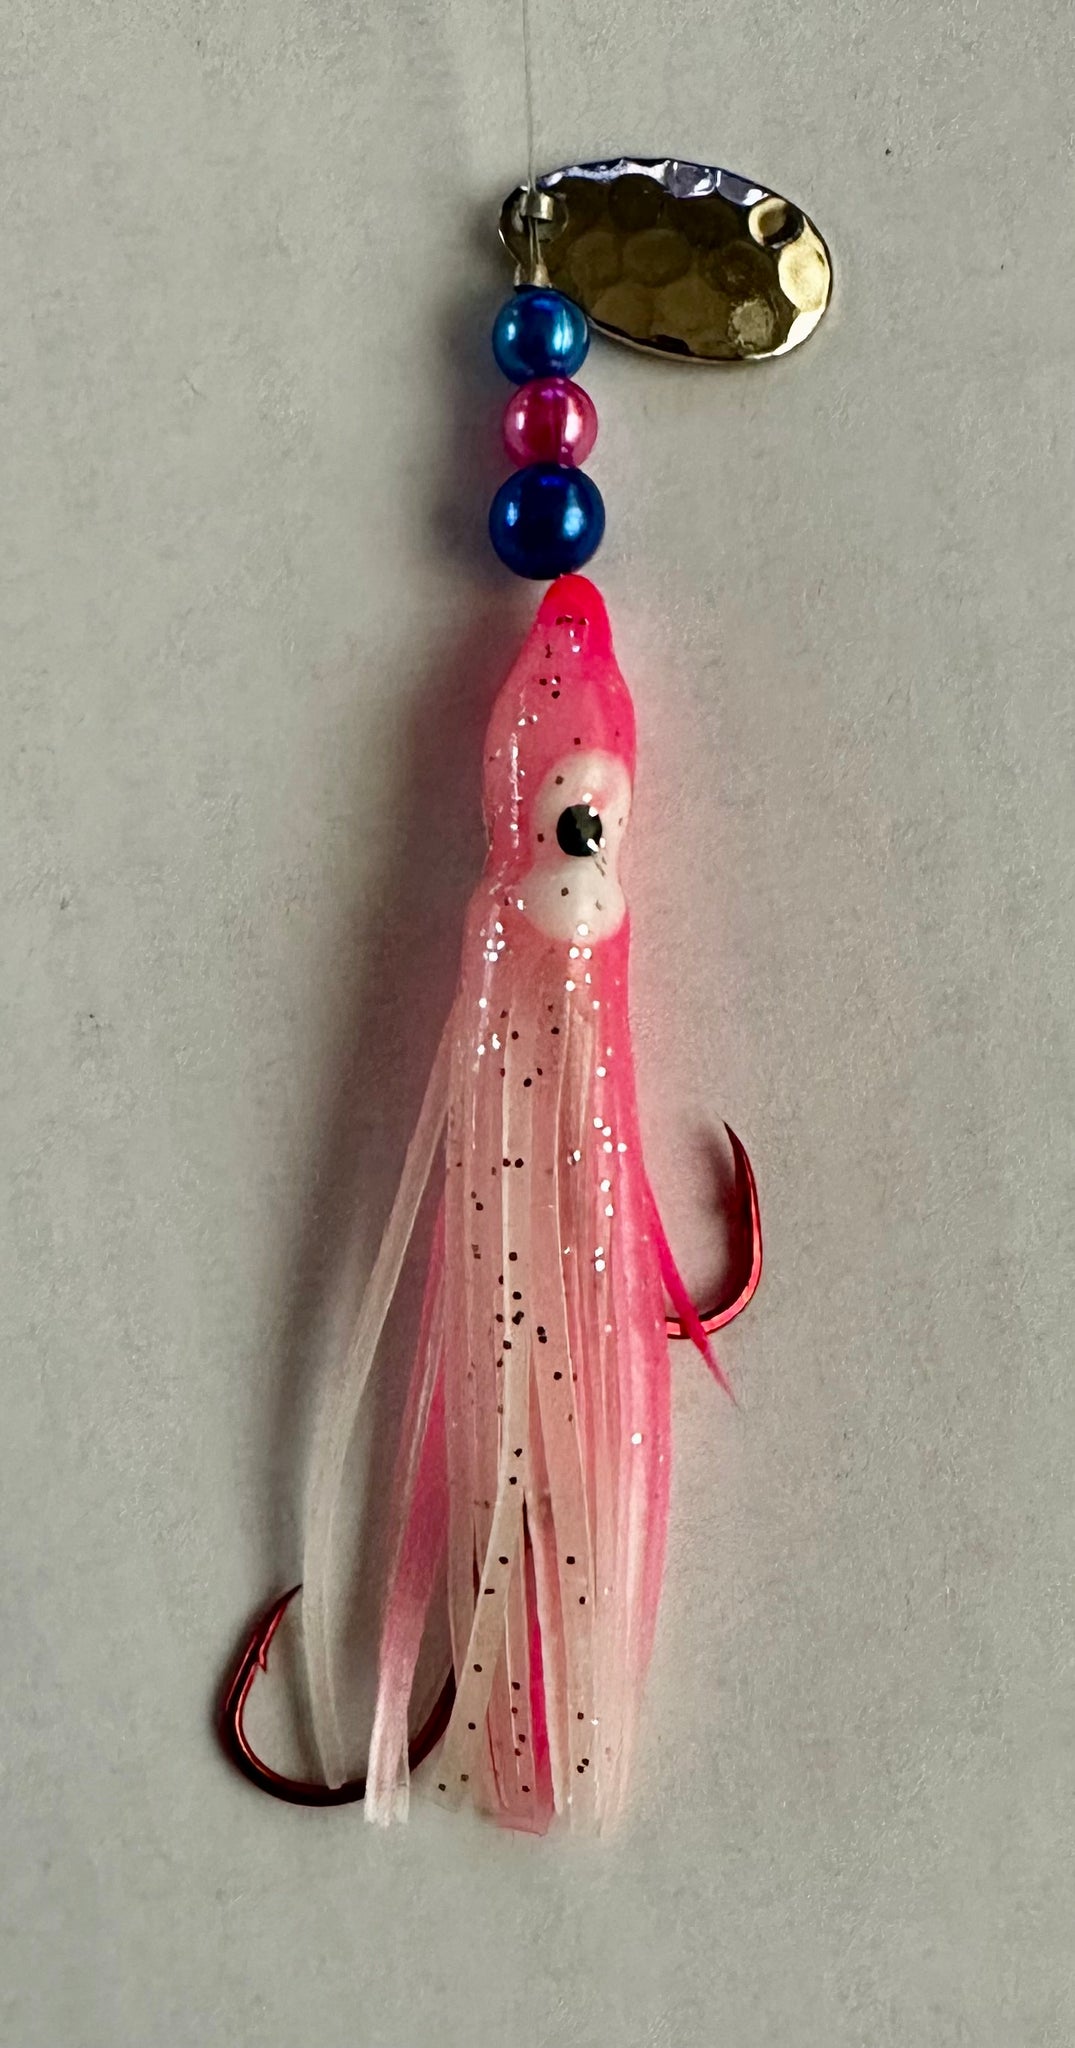 Hoochie - Pink and White #3 Luminous Octopus Hoochie with Nickel Spinner Blade - 6cm